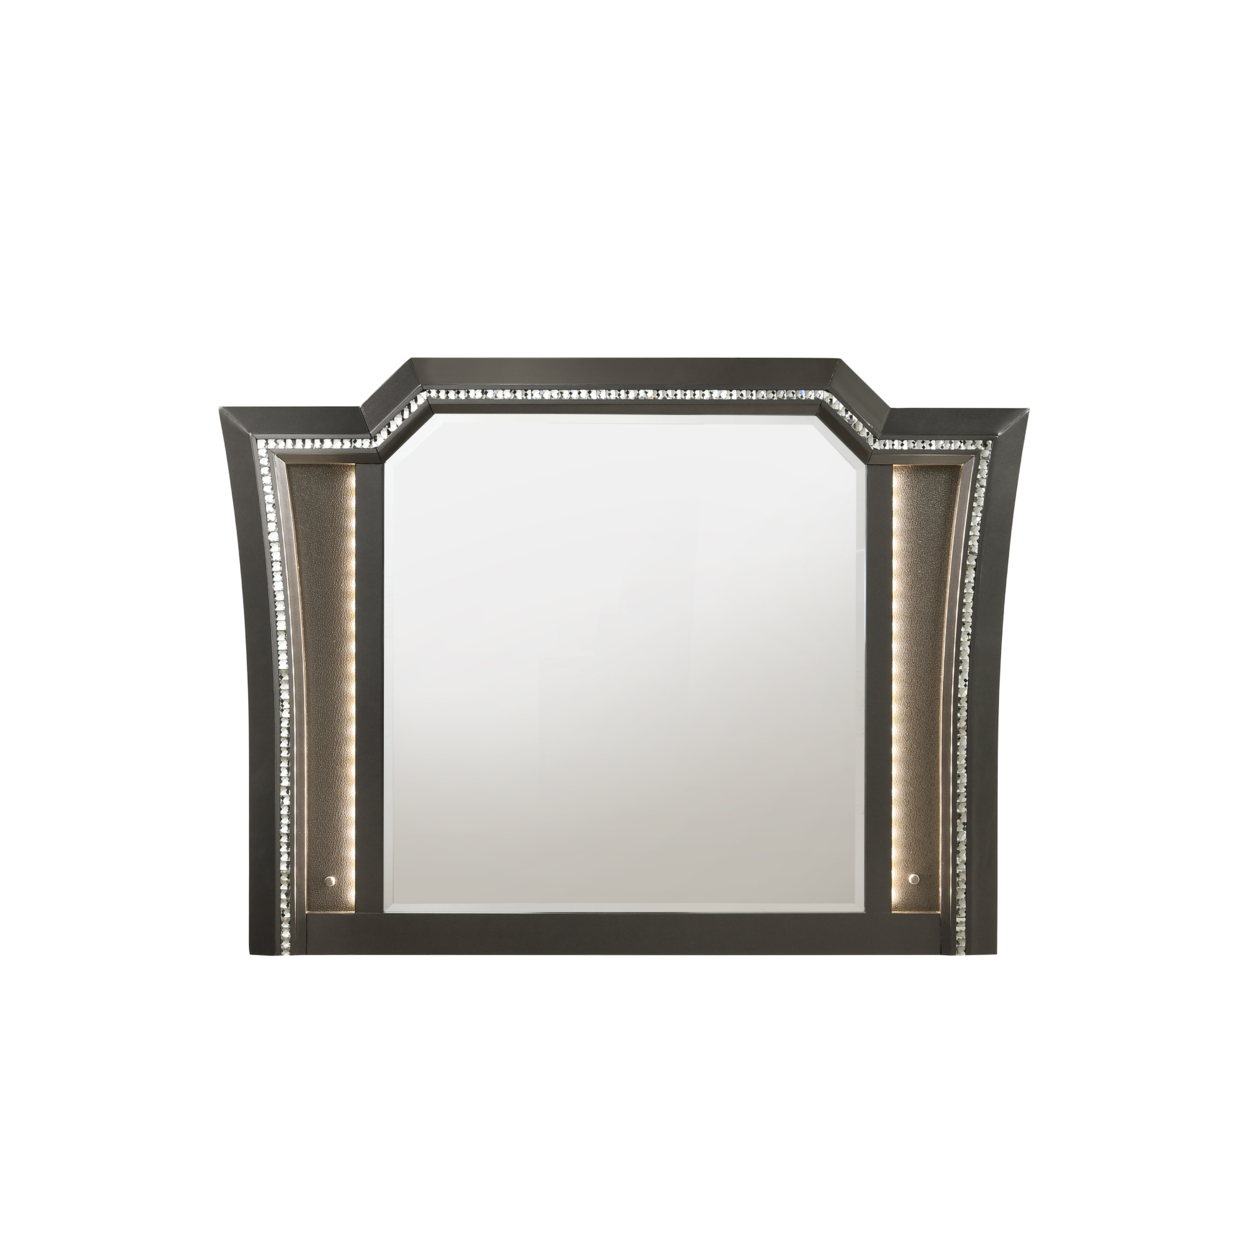 Contemporary Style Wooden Decorative Mirror With LED Lights, Gray- Saltoro Sherpi